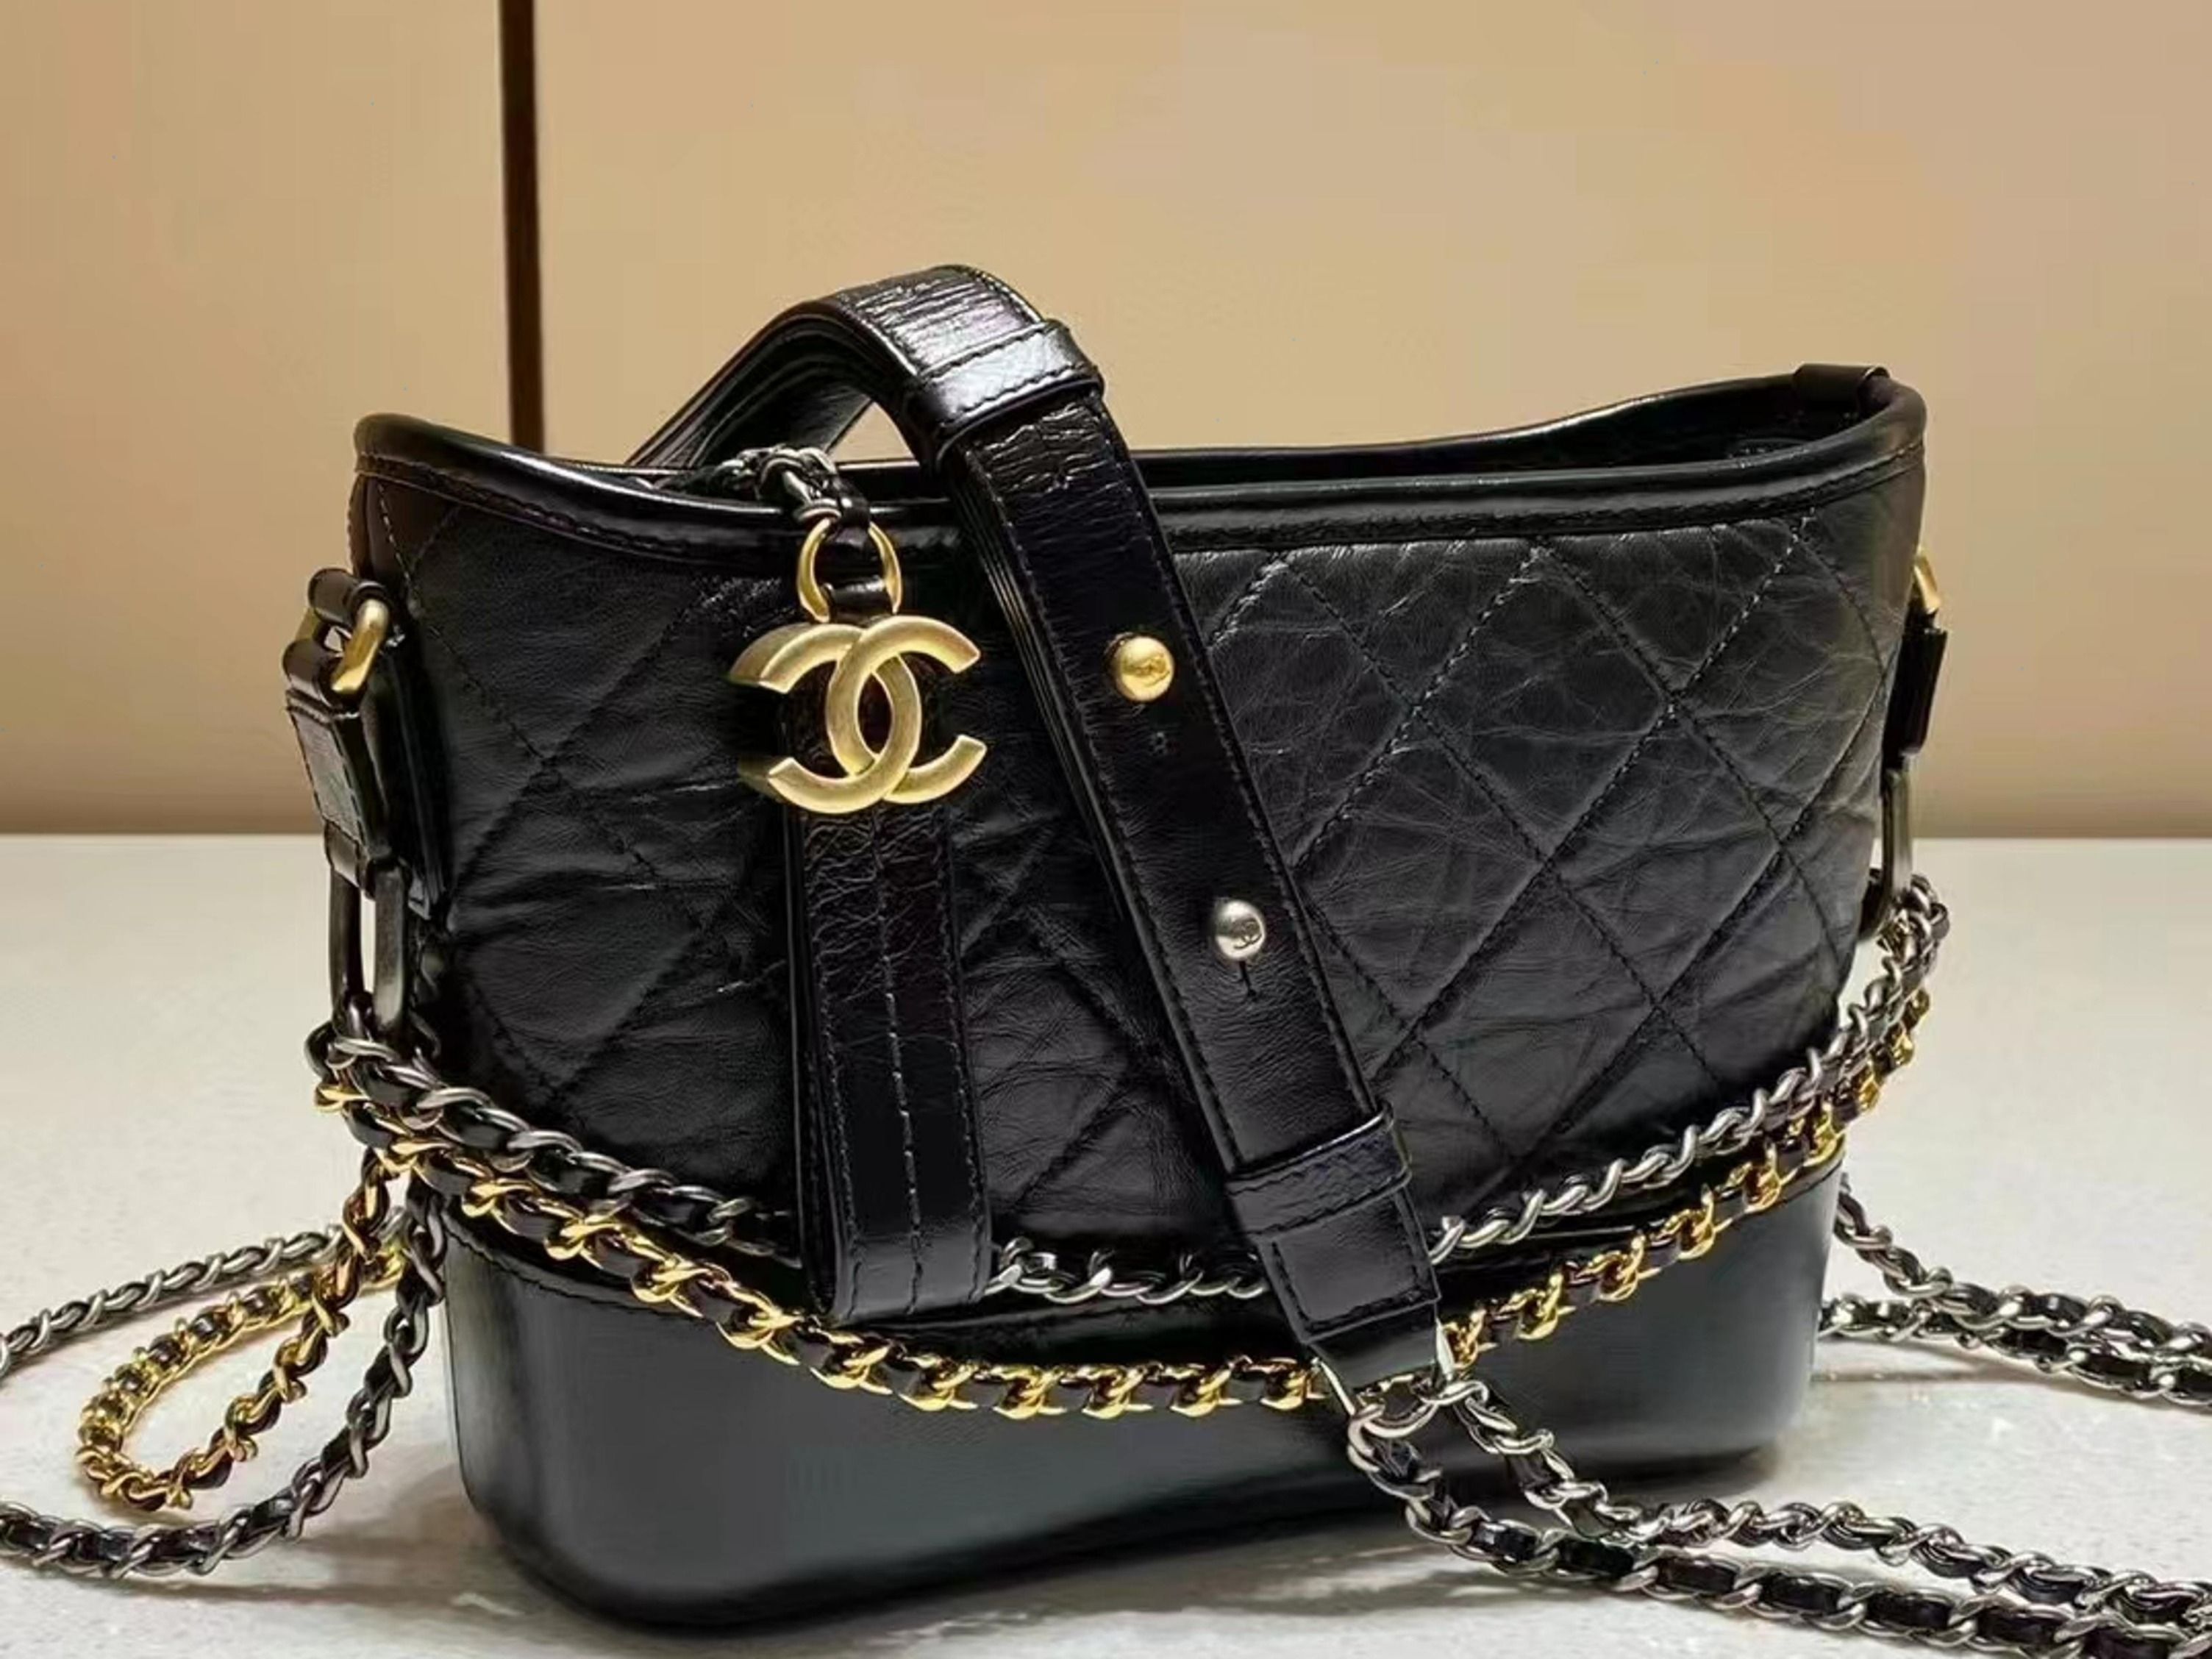 Chanel 2017 Gabrielle Large Hobo Bag Nude/Black Leather